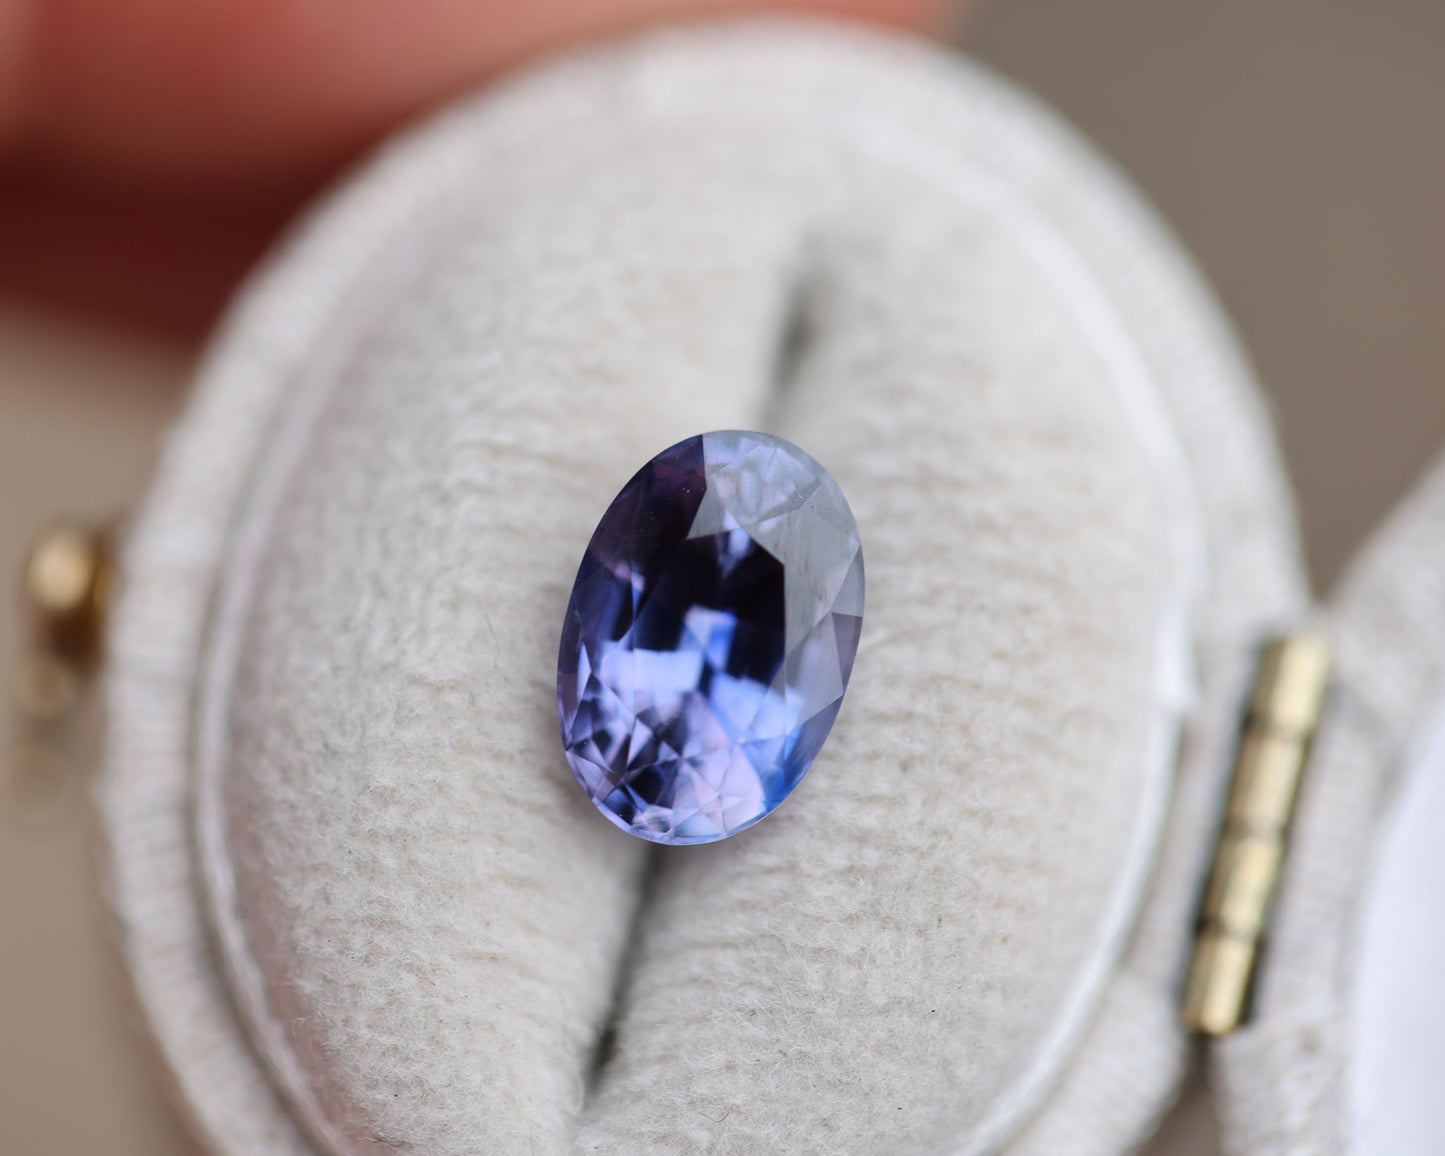 Load image into Gallery viewer, 3.04ct oval violet purple/blue sapphire
